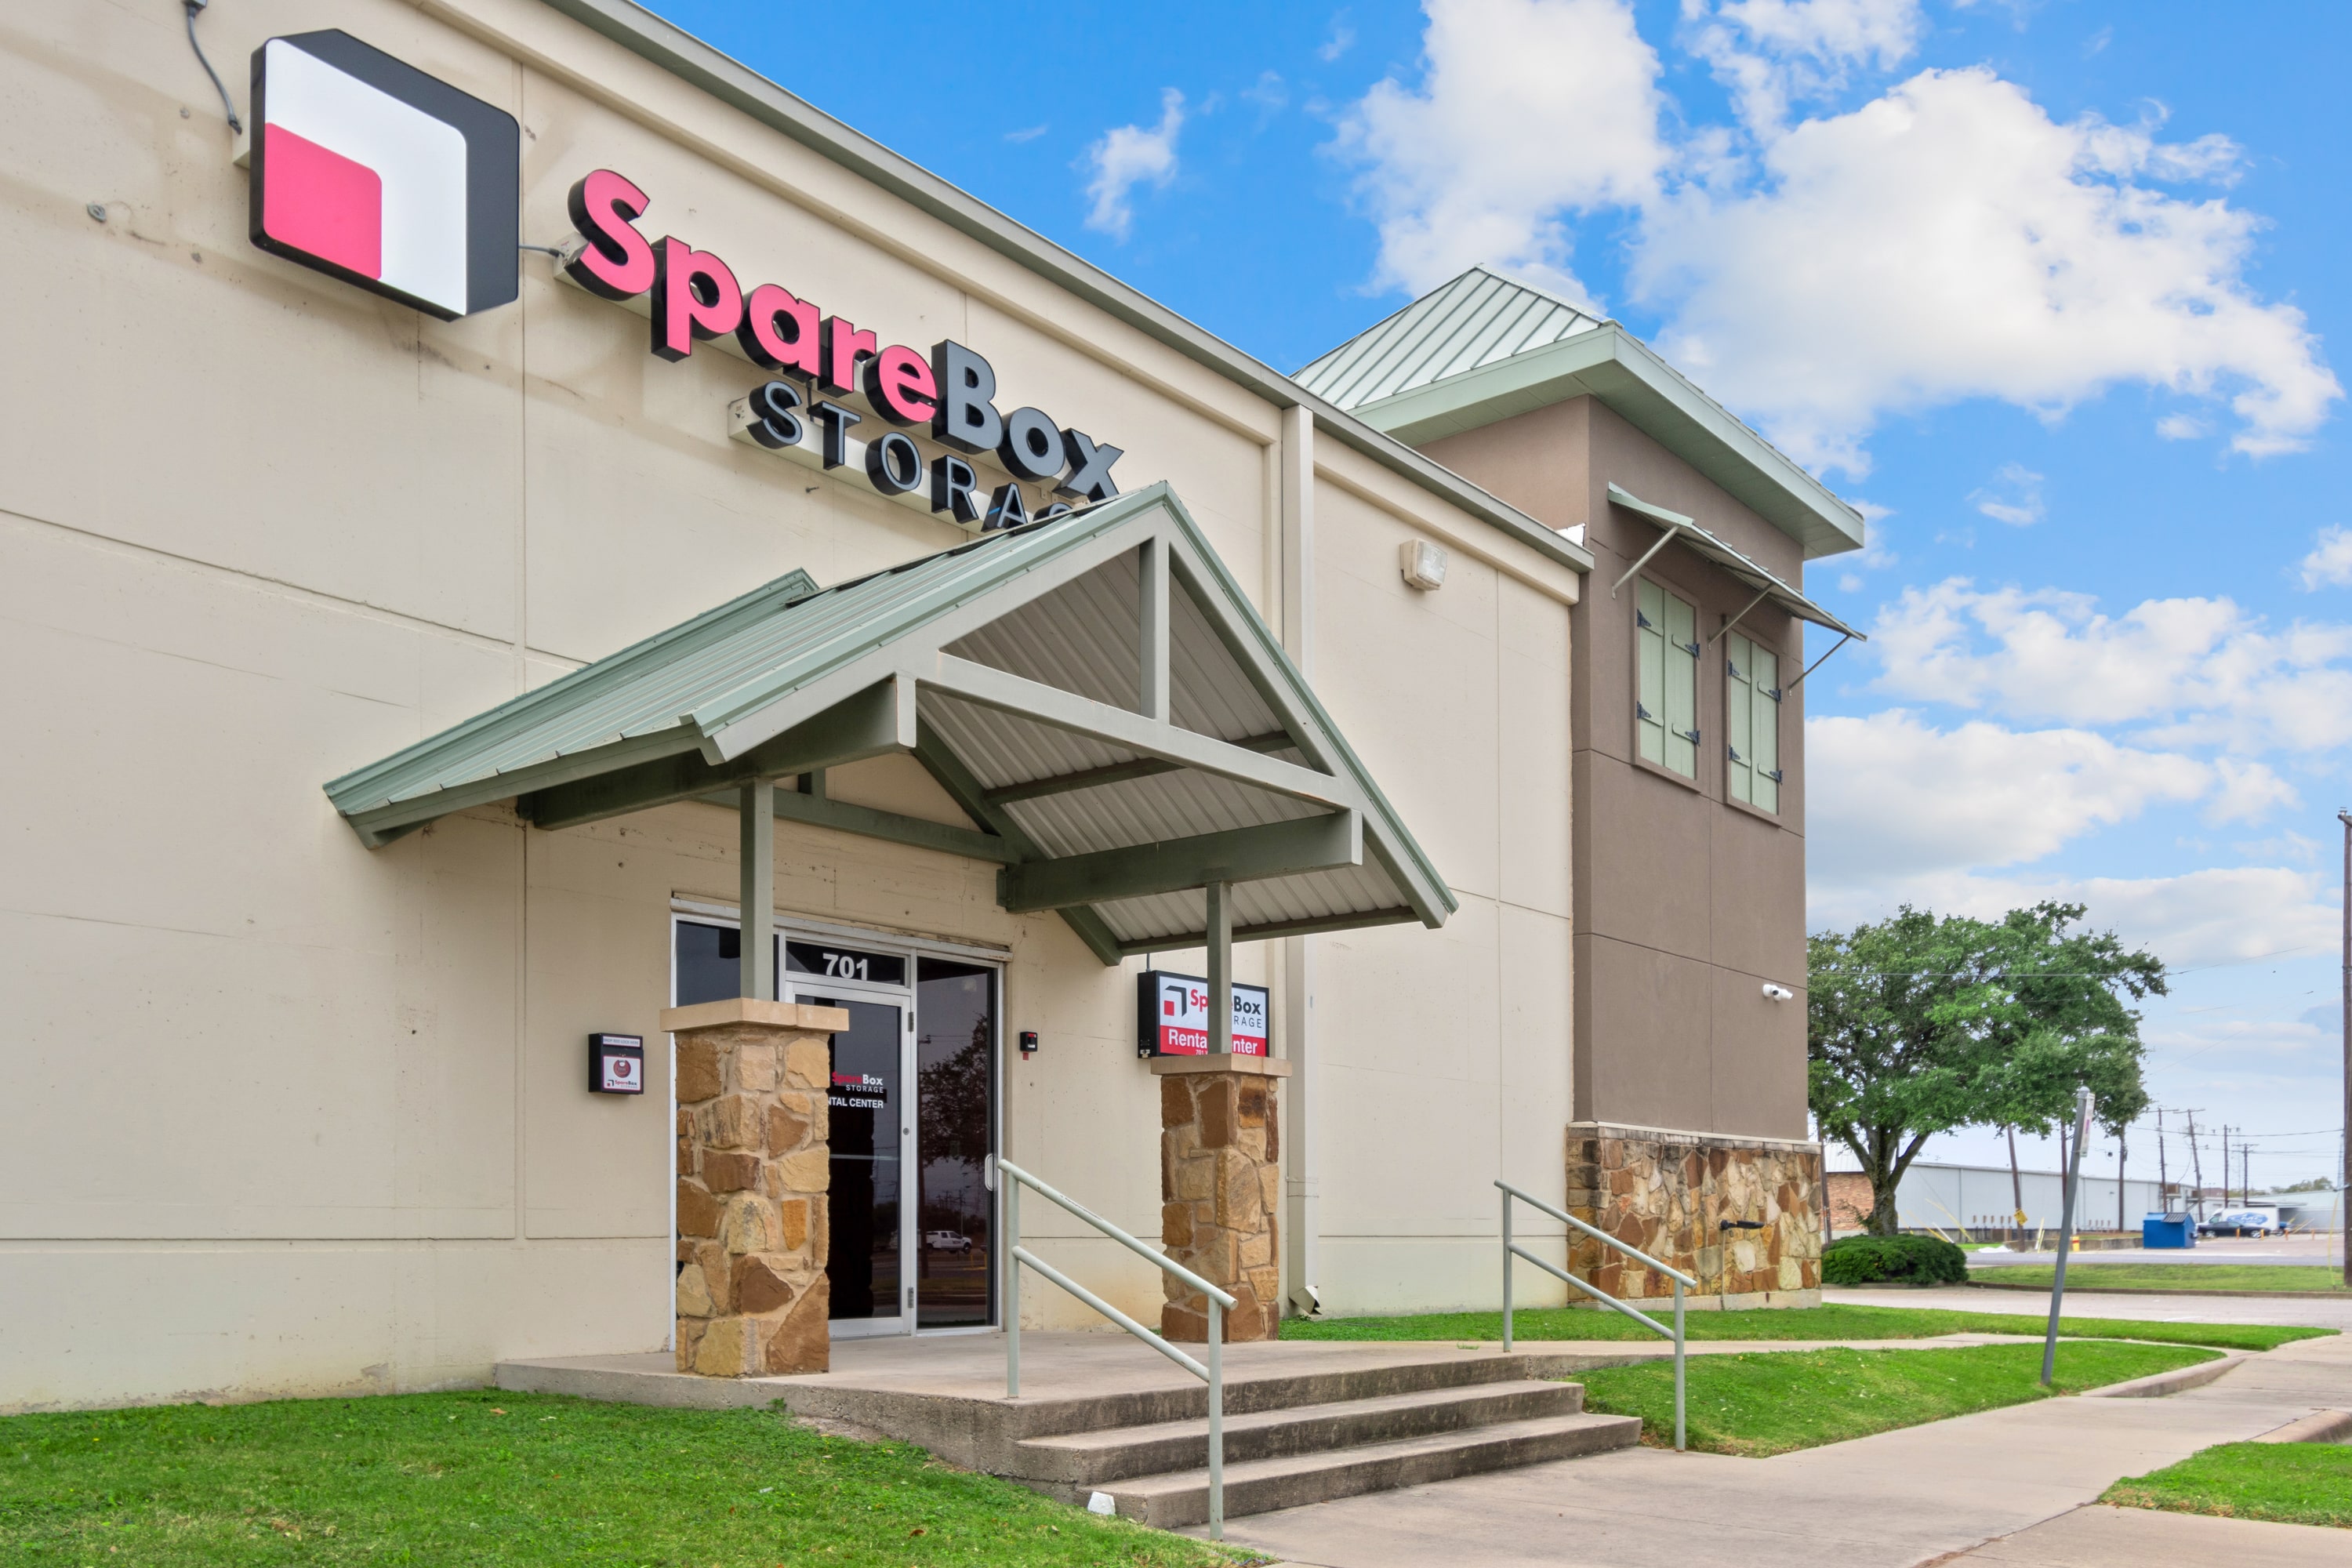 Meet all of your self storage needs in Woodway, TX at our West Loop 340 location | SpareBox Storage